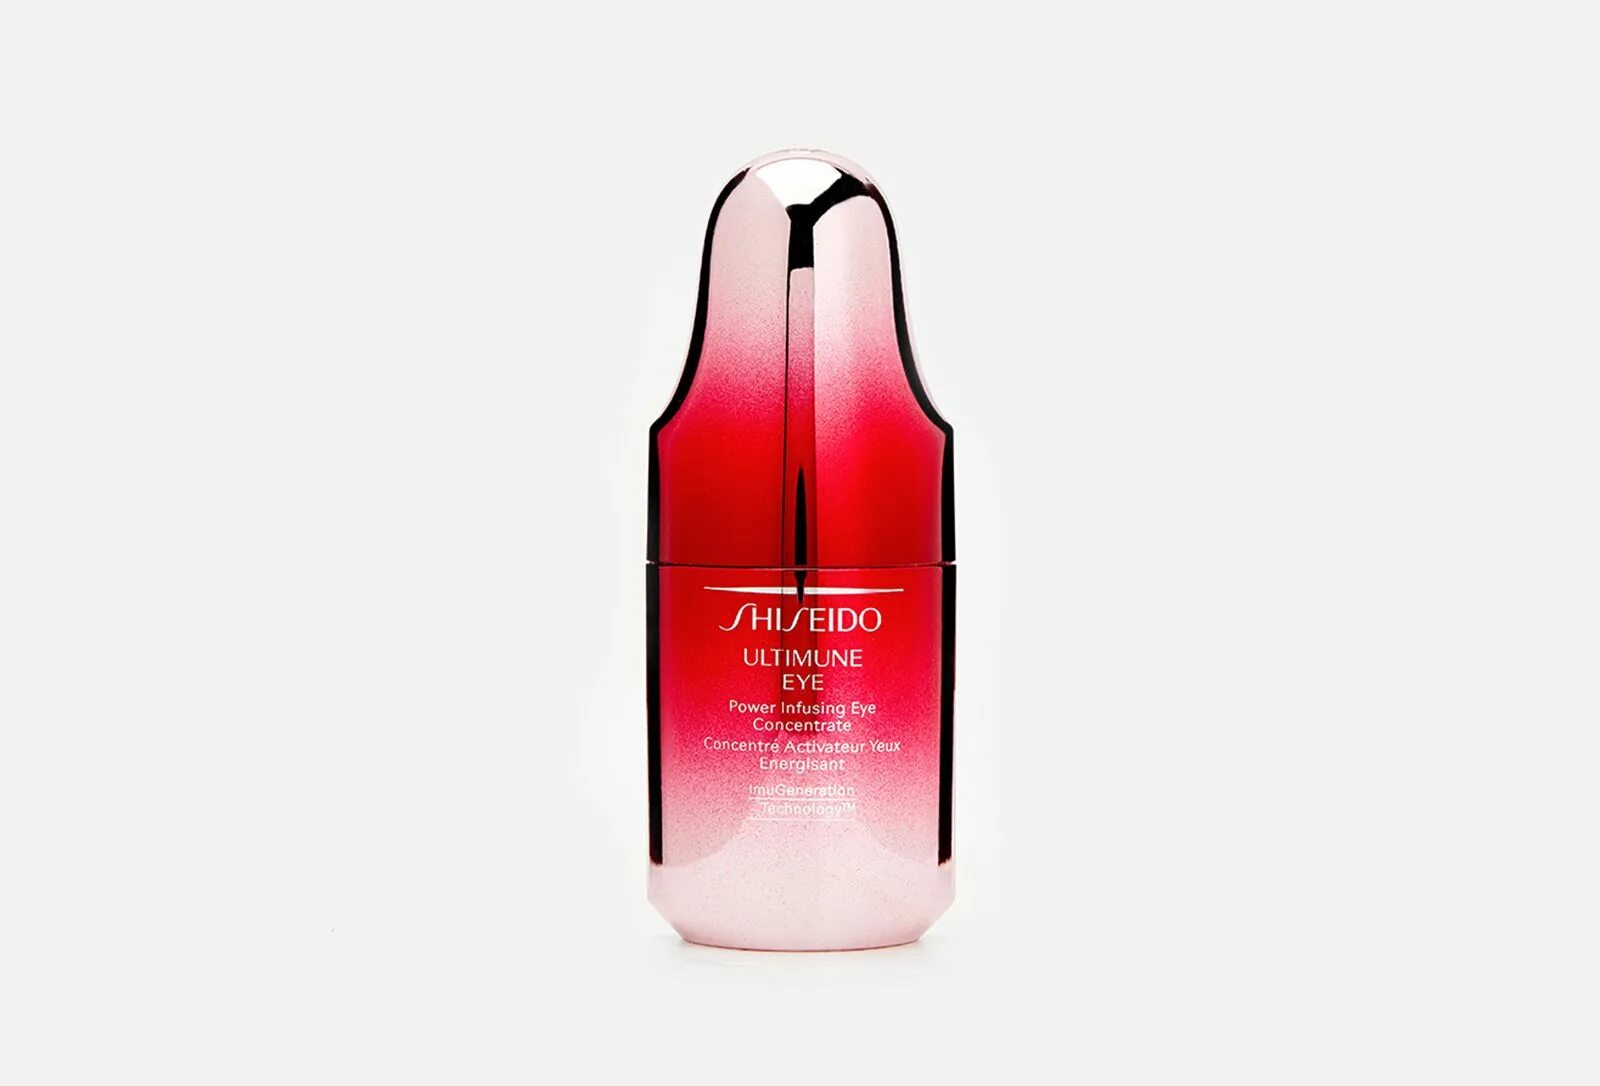 Shiseido concentrate. Ultimune концентрат шисейдо Power infusing. Концентрат Shiseido Ultimune Power infusing Concentrate. Shiseido Ultimate Power infusing. Shiseido Ultimate Serum.